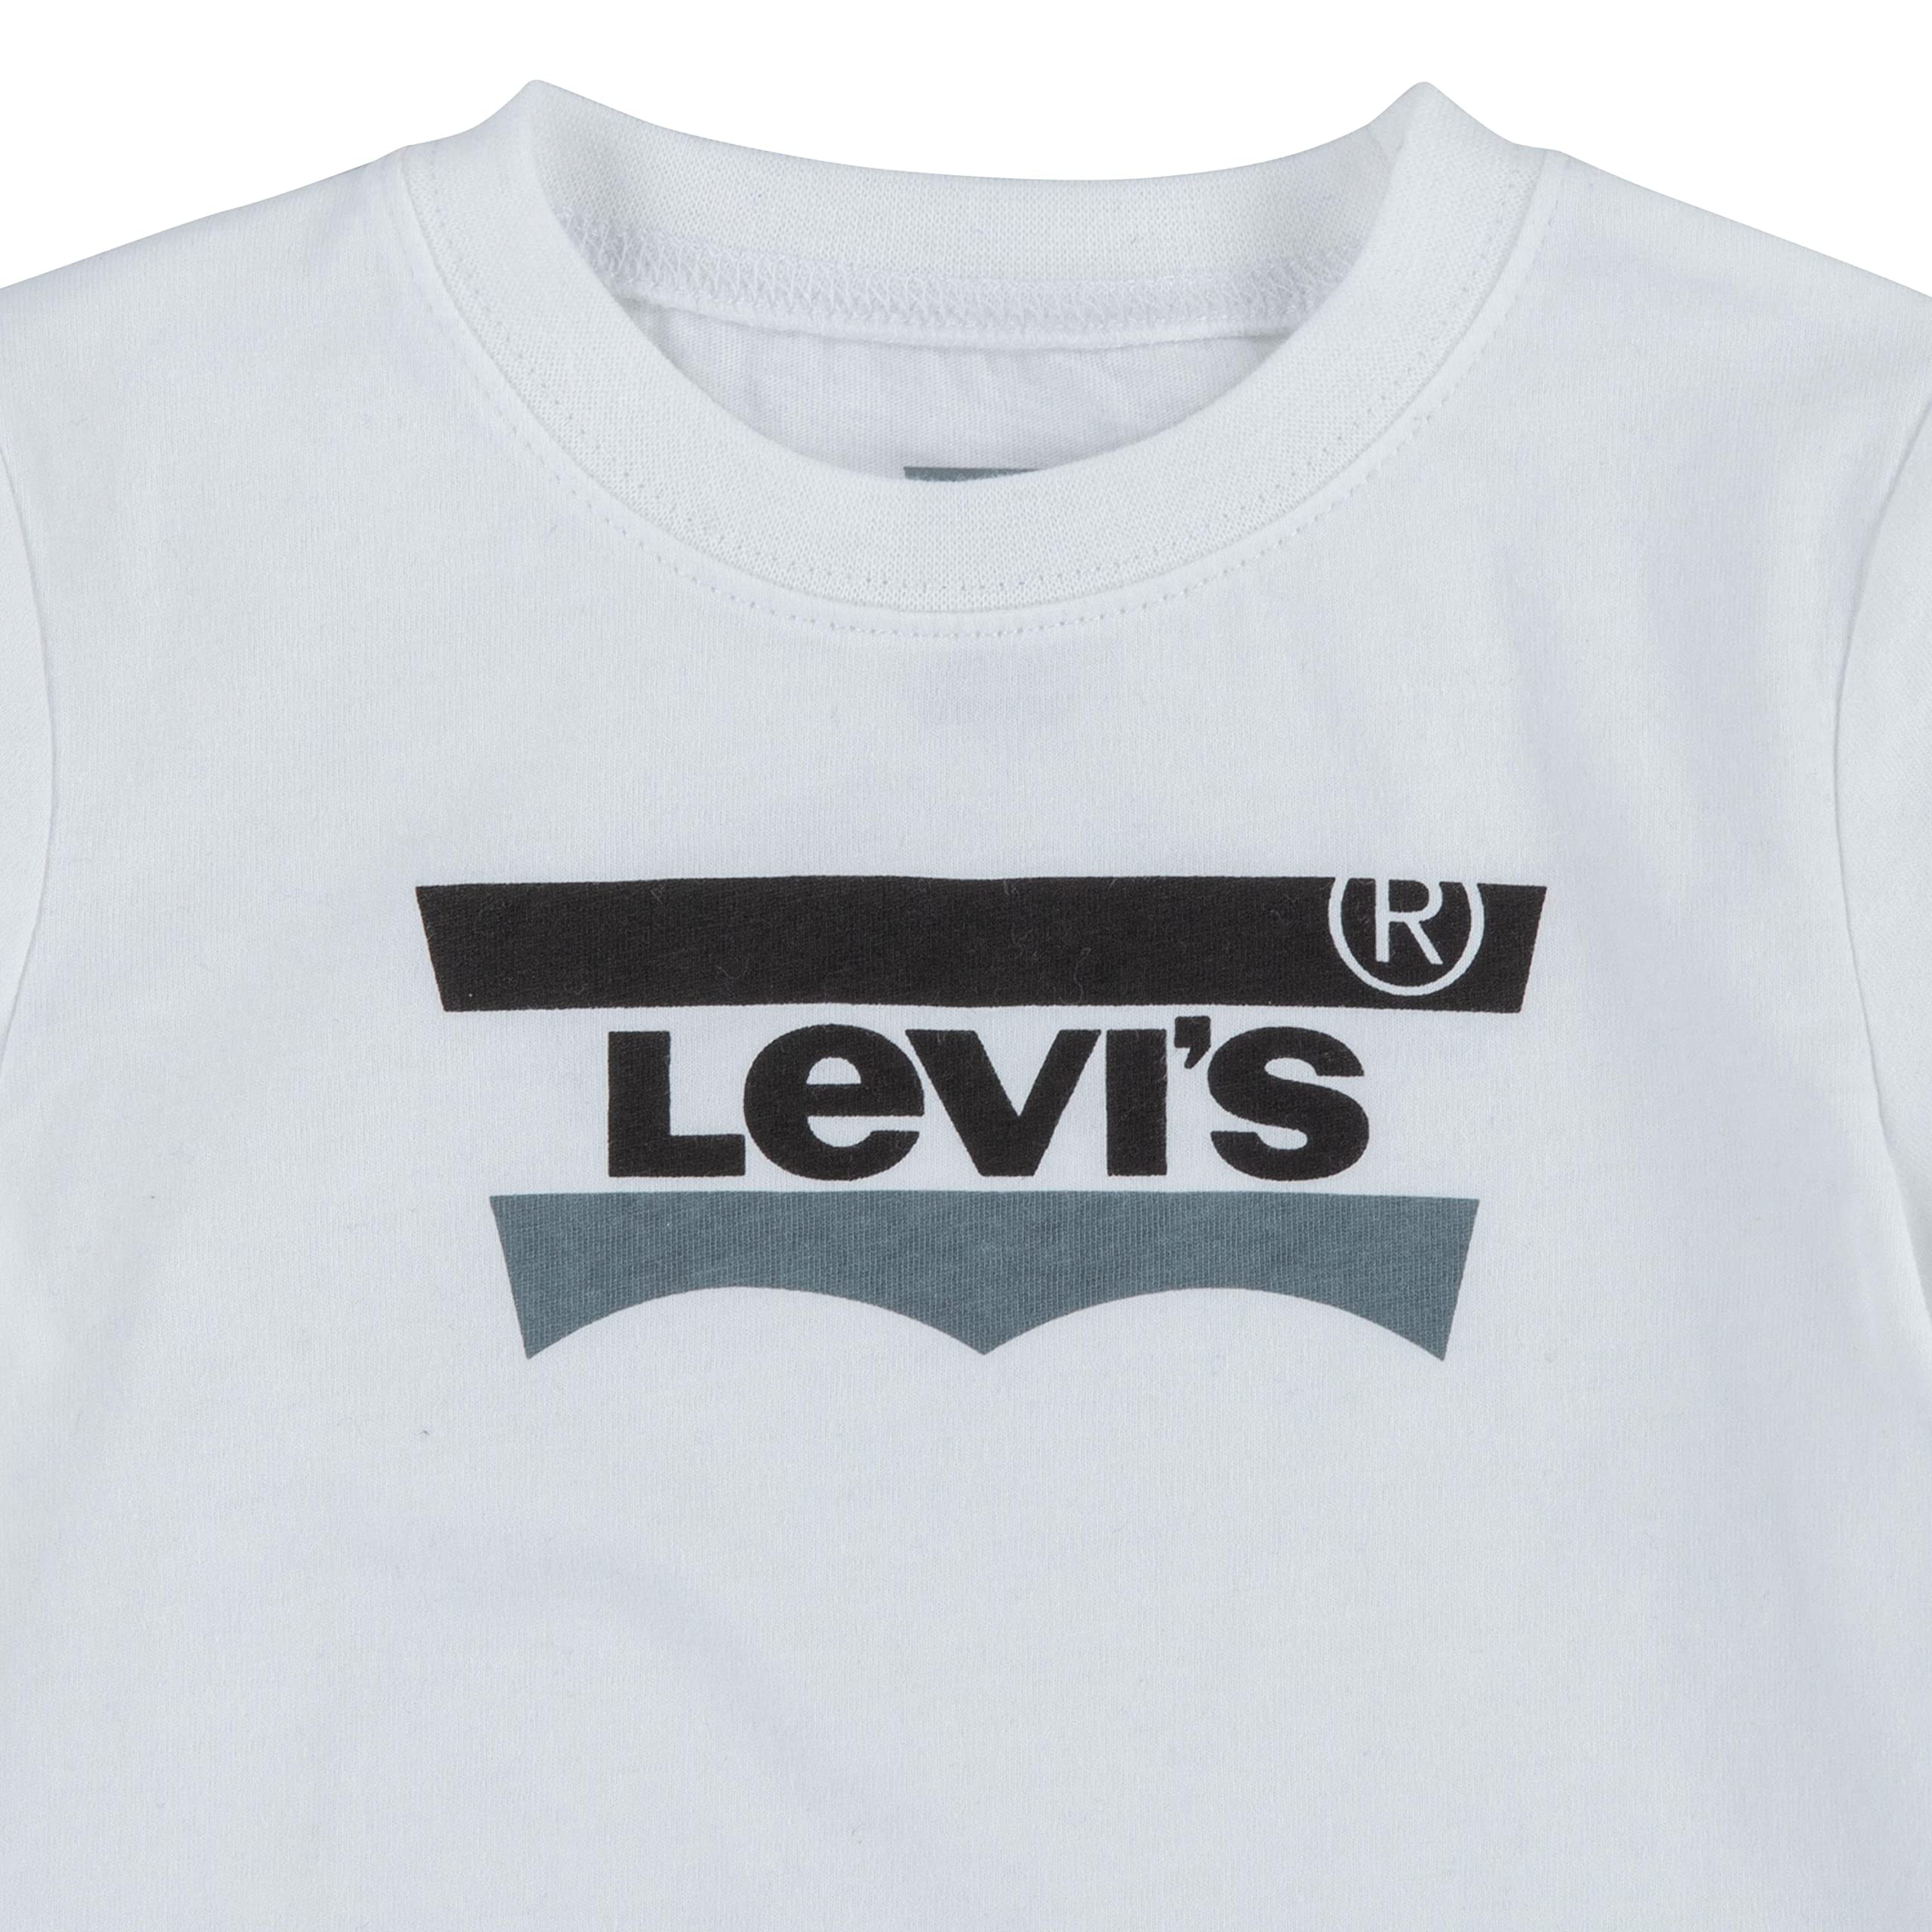 Levi's Baby Boys' Graphic T-shirt, Hoodie and Denim 3-piece Outfit Set